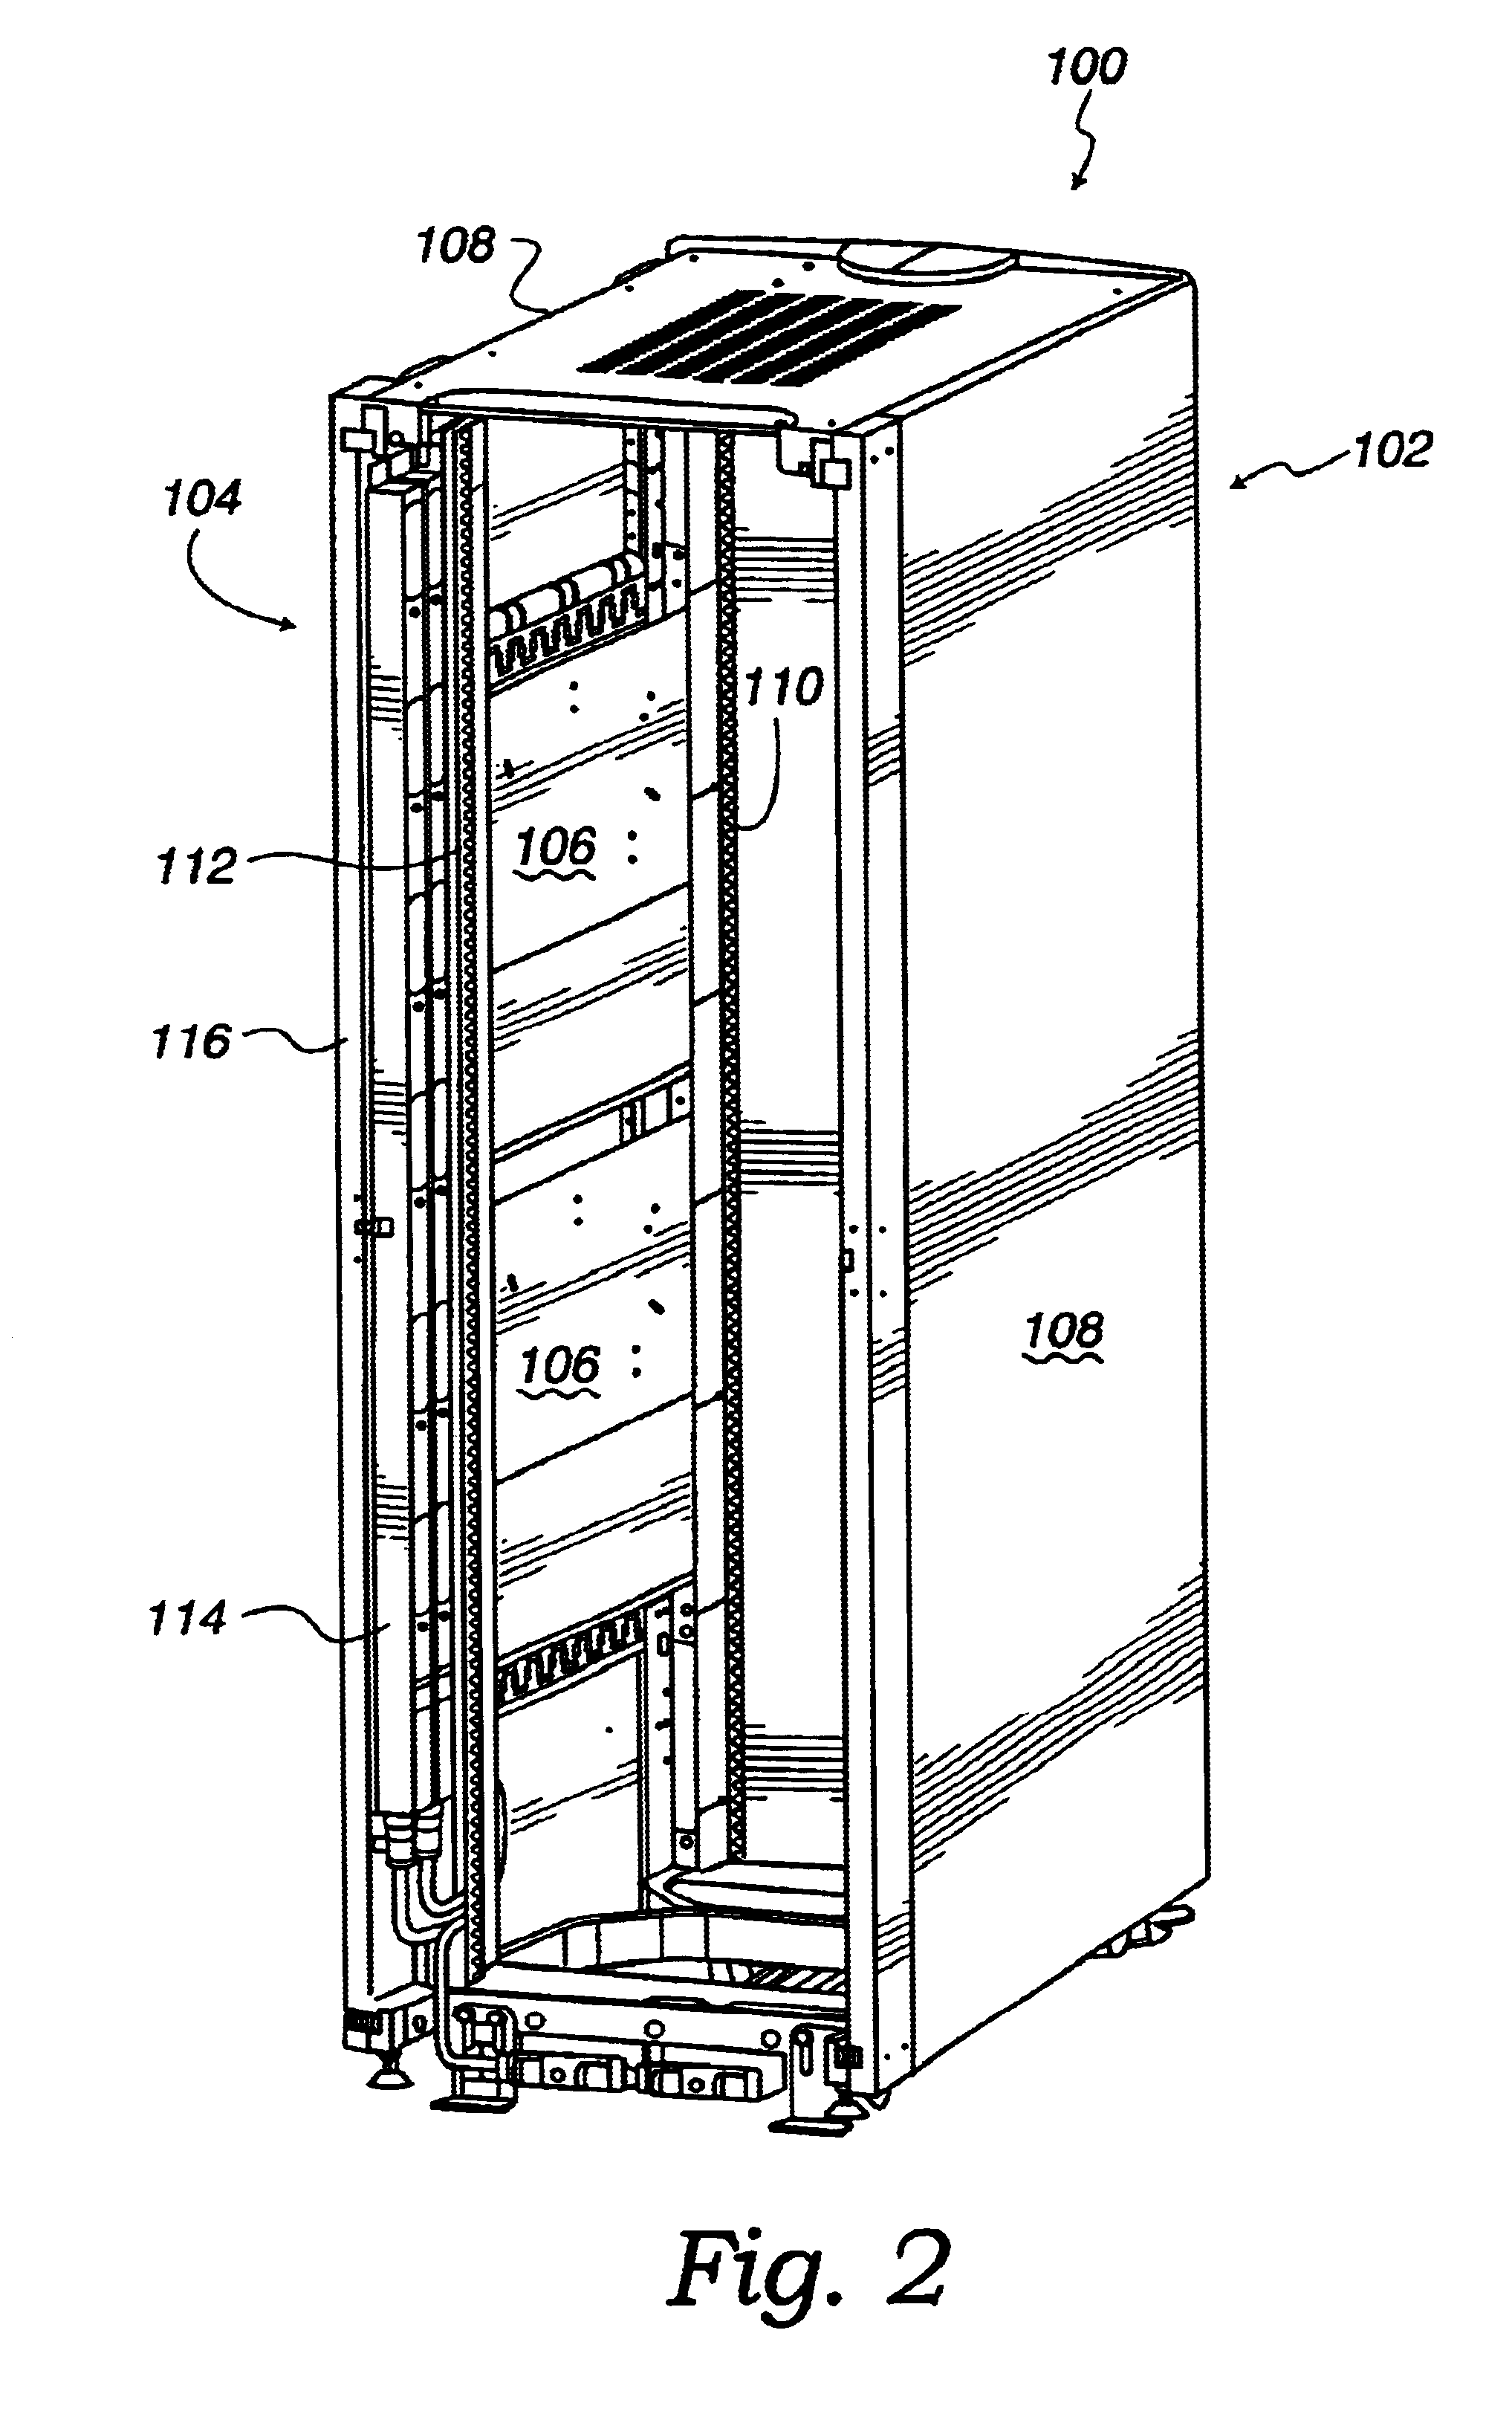 Integrated component rack and AC power distribution